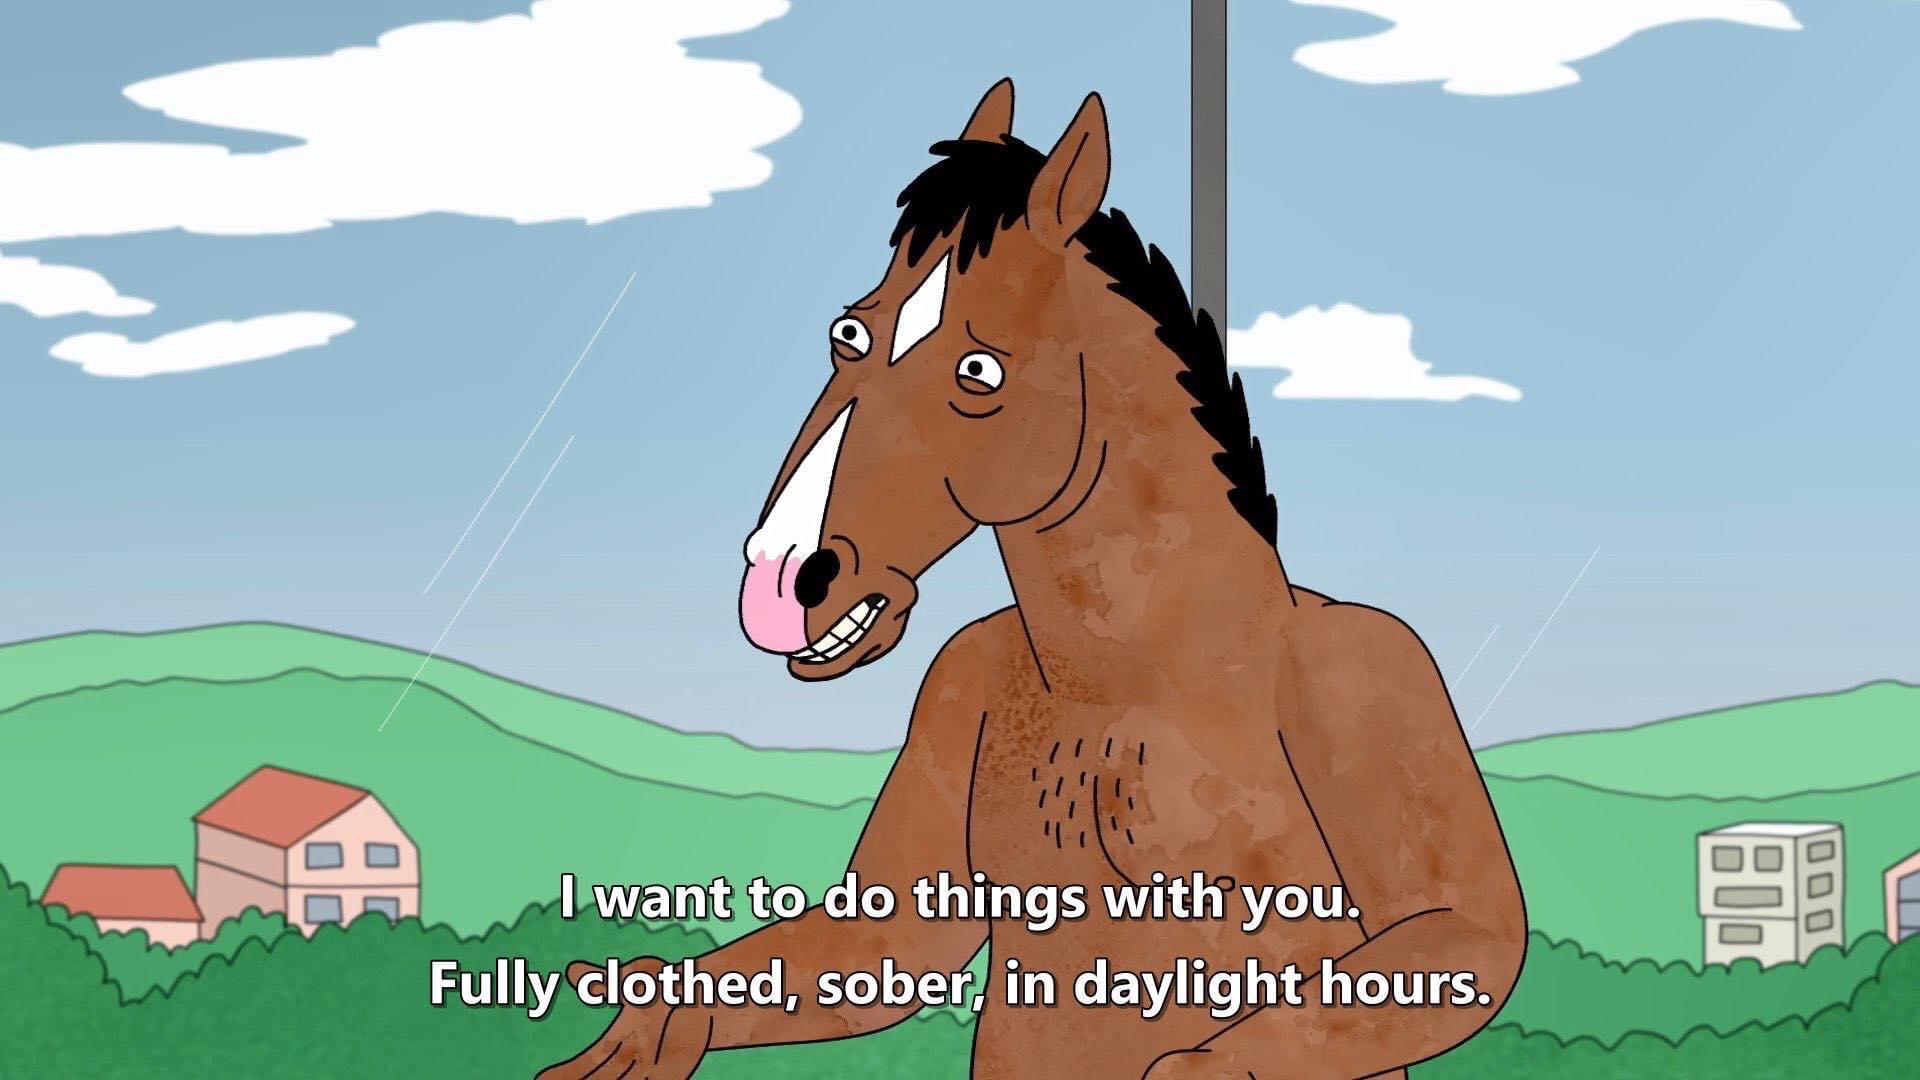 bojack horseman quotes sad - . 000 I want to do things with you. Fully clothed, sober, in daylight hours.